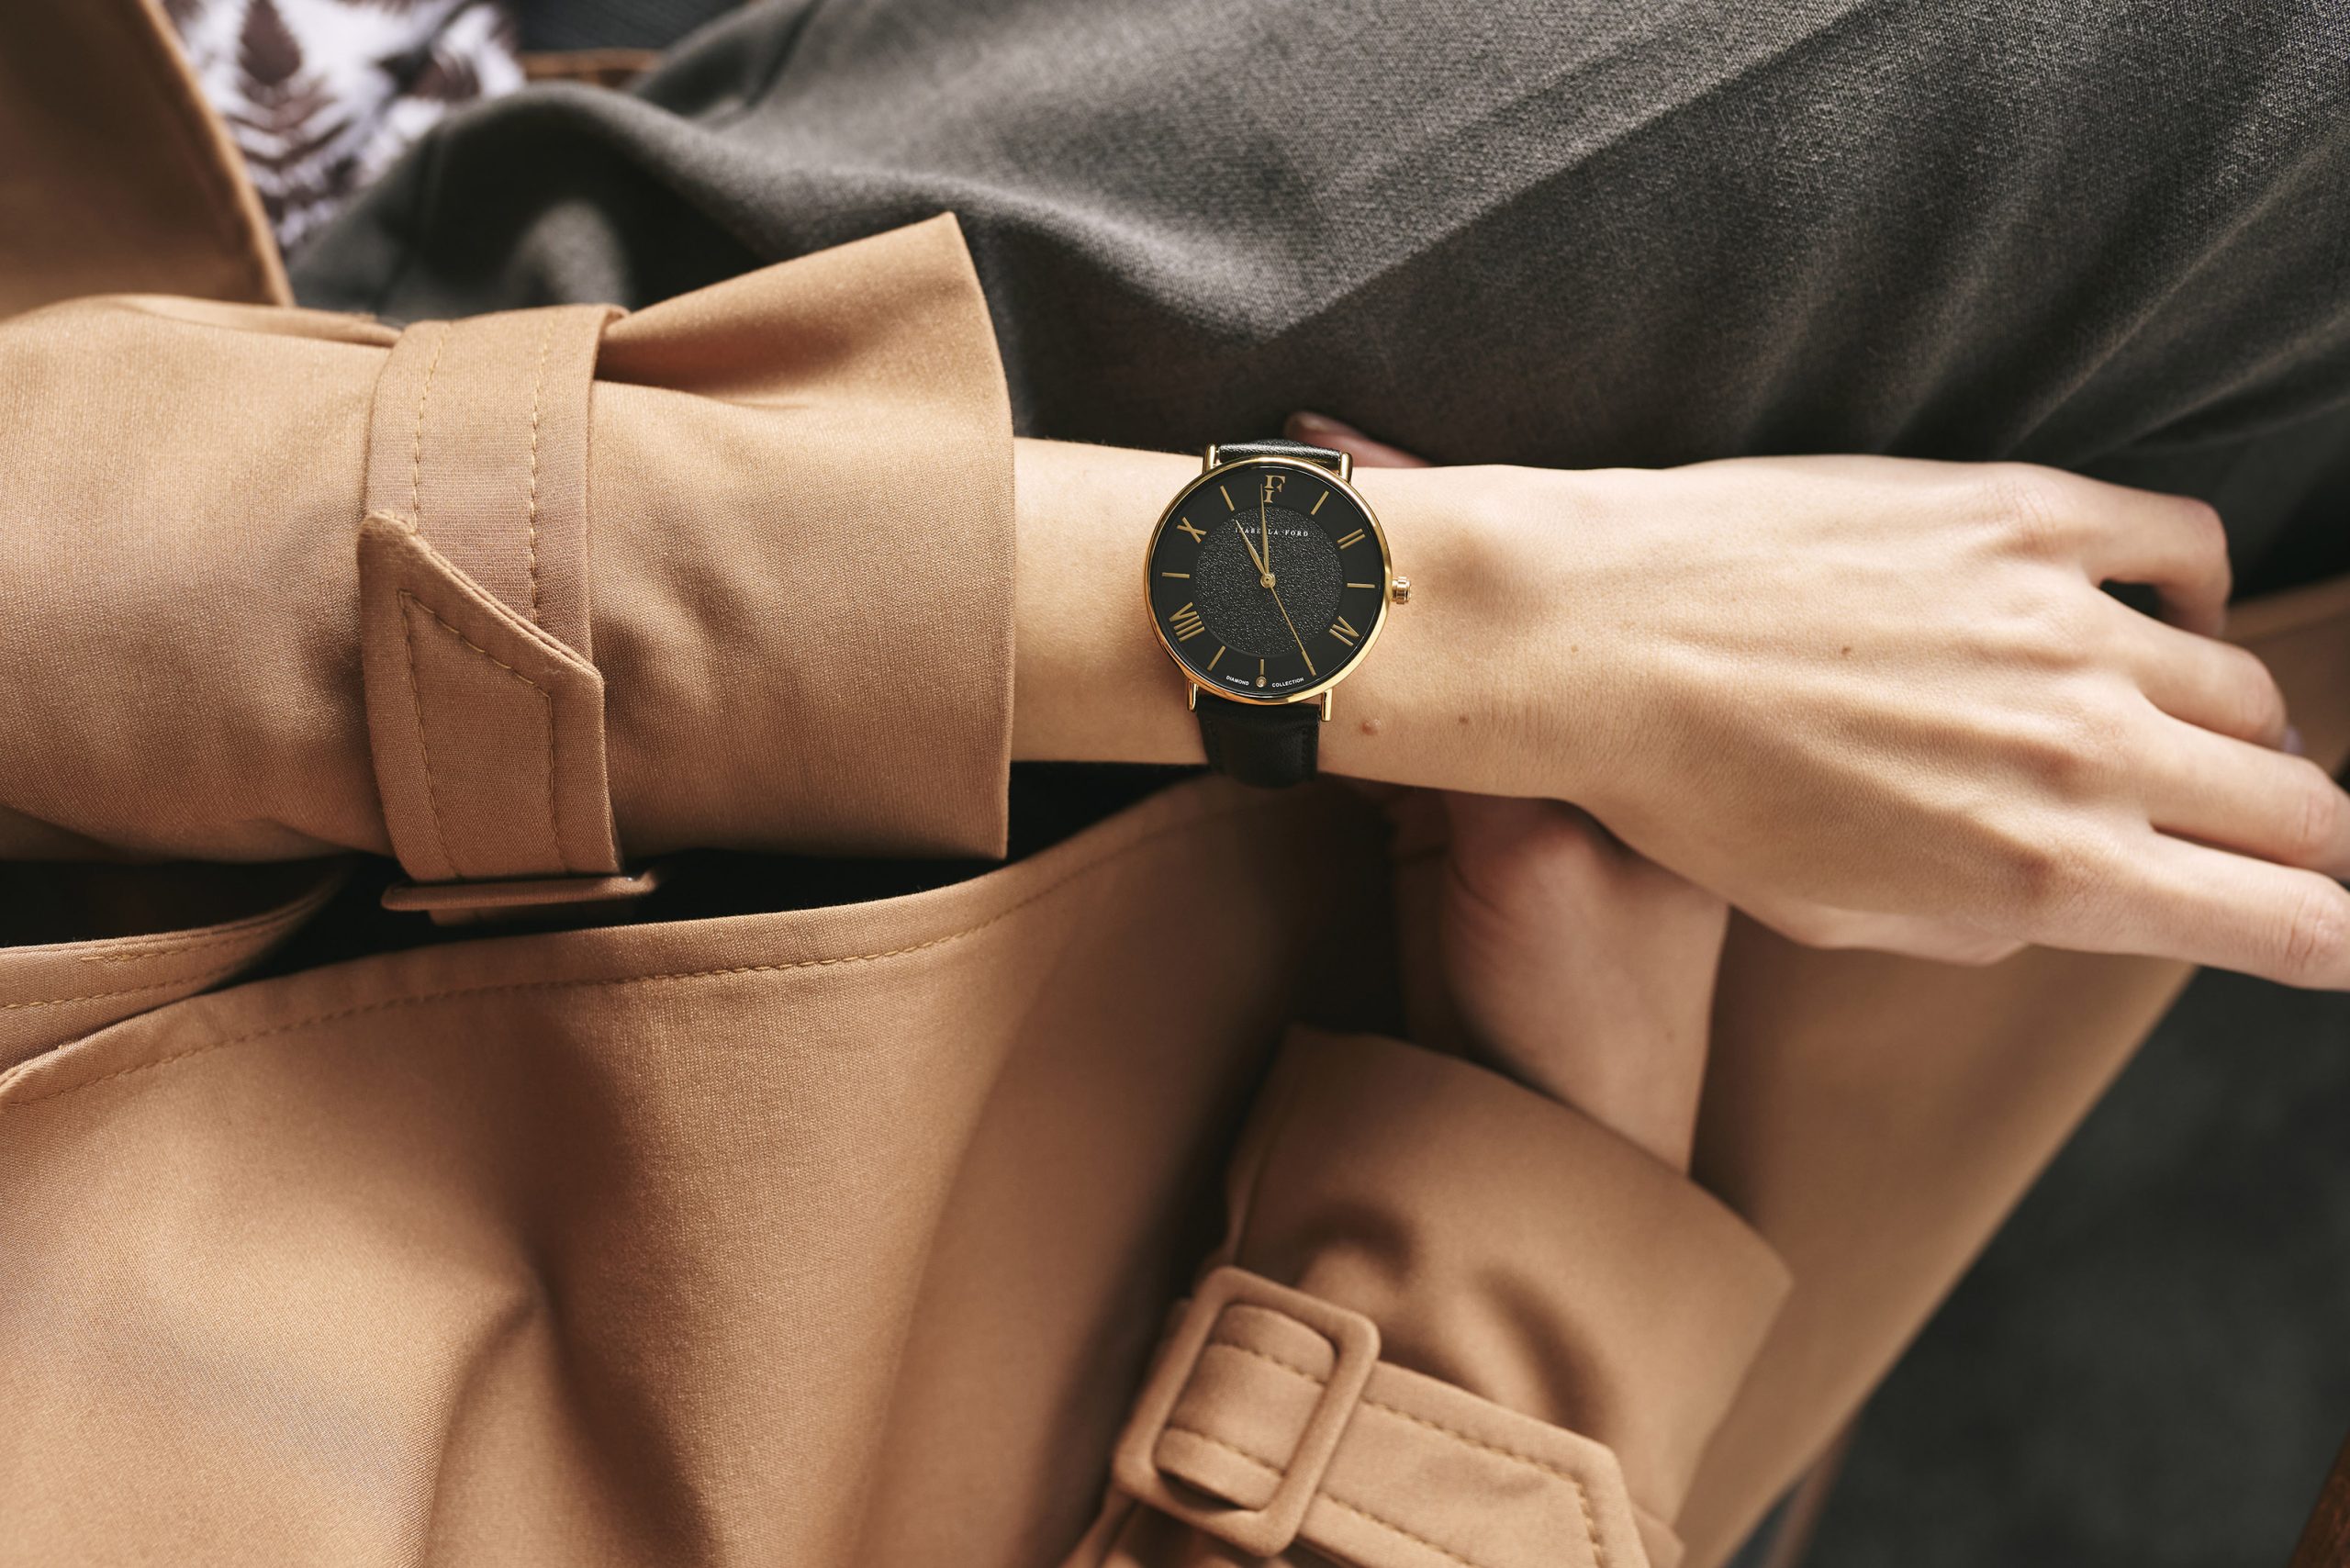 A black watch in gold case with black leather bracelet